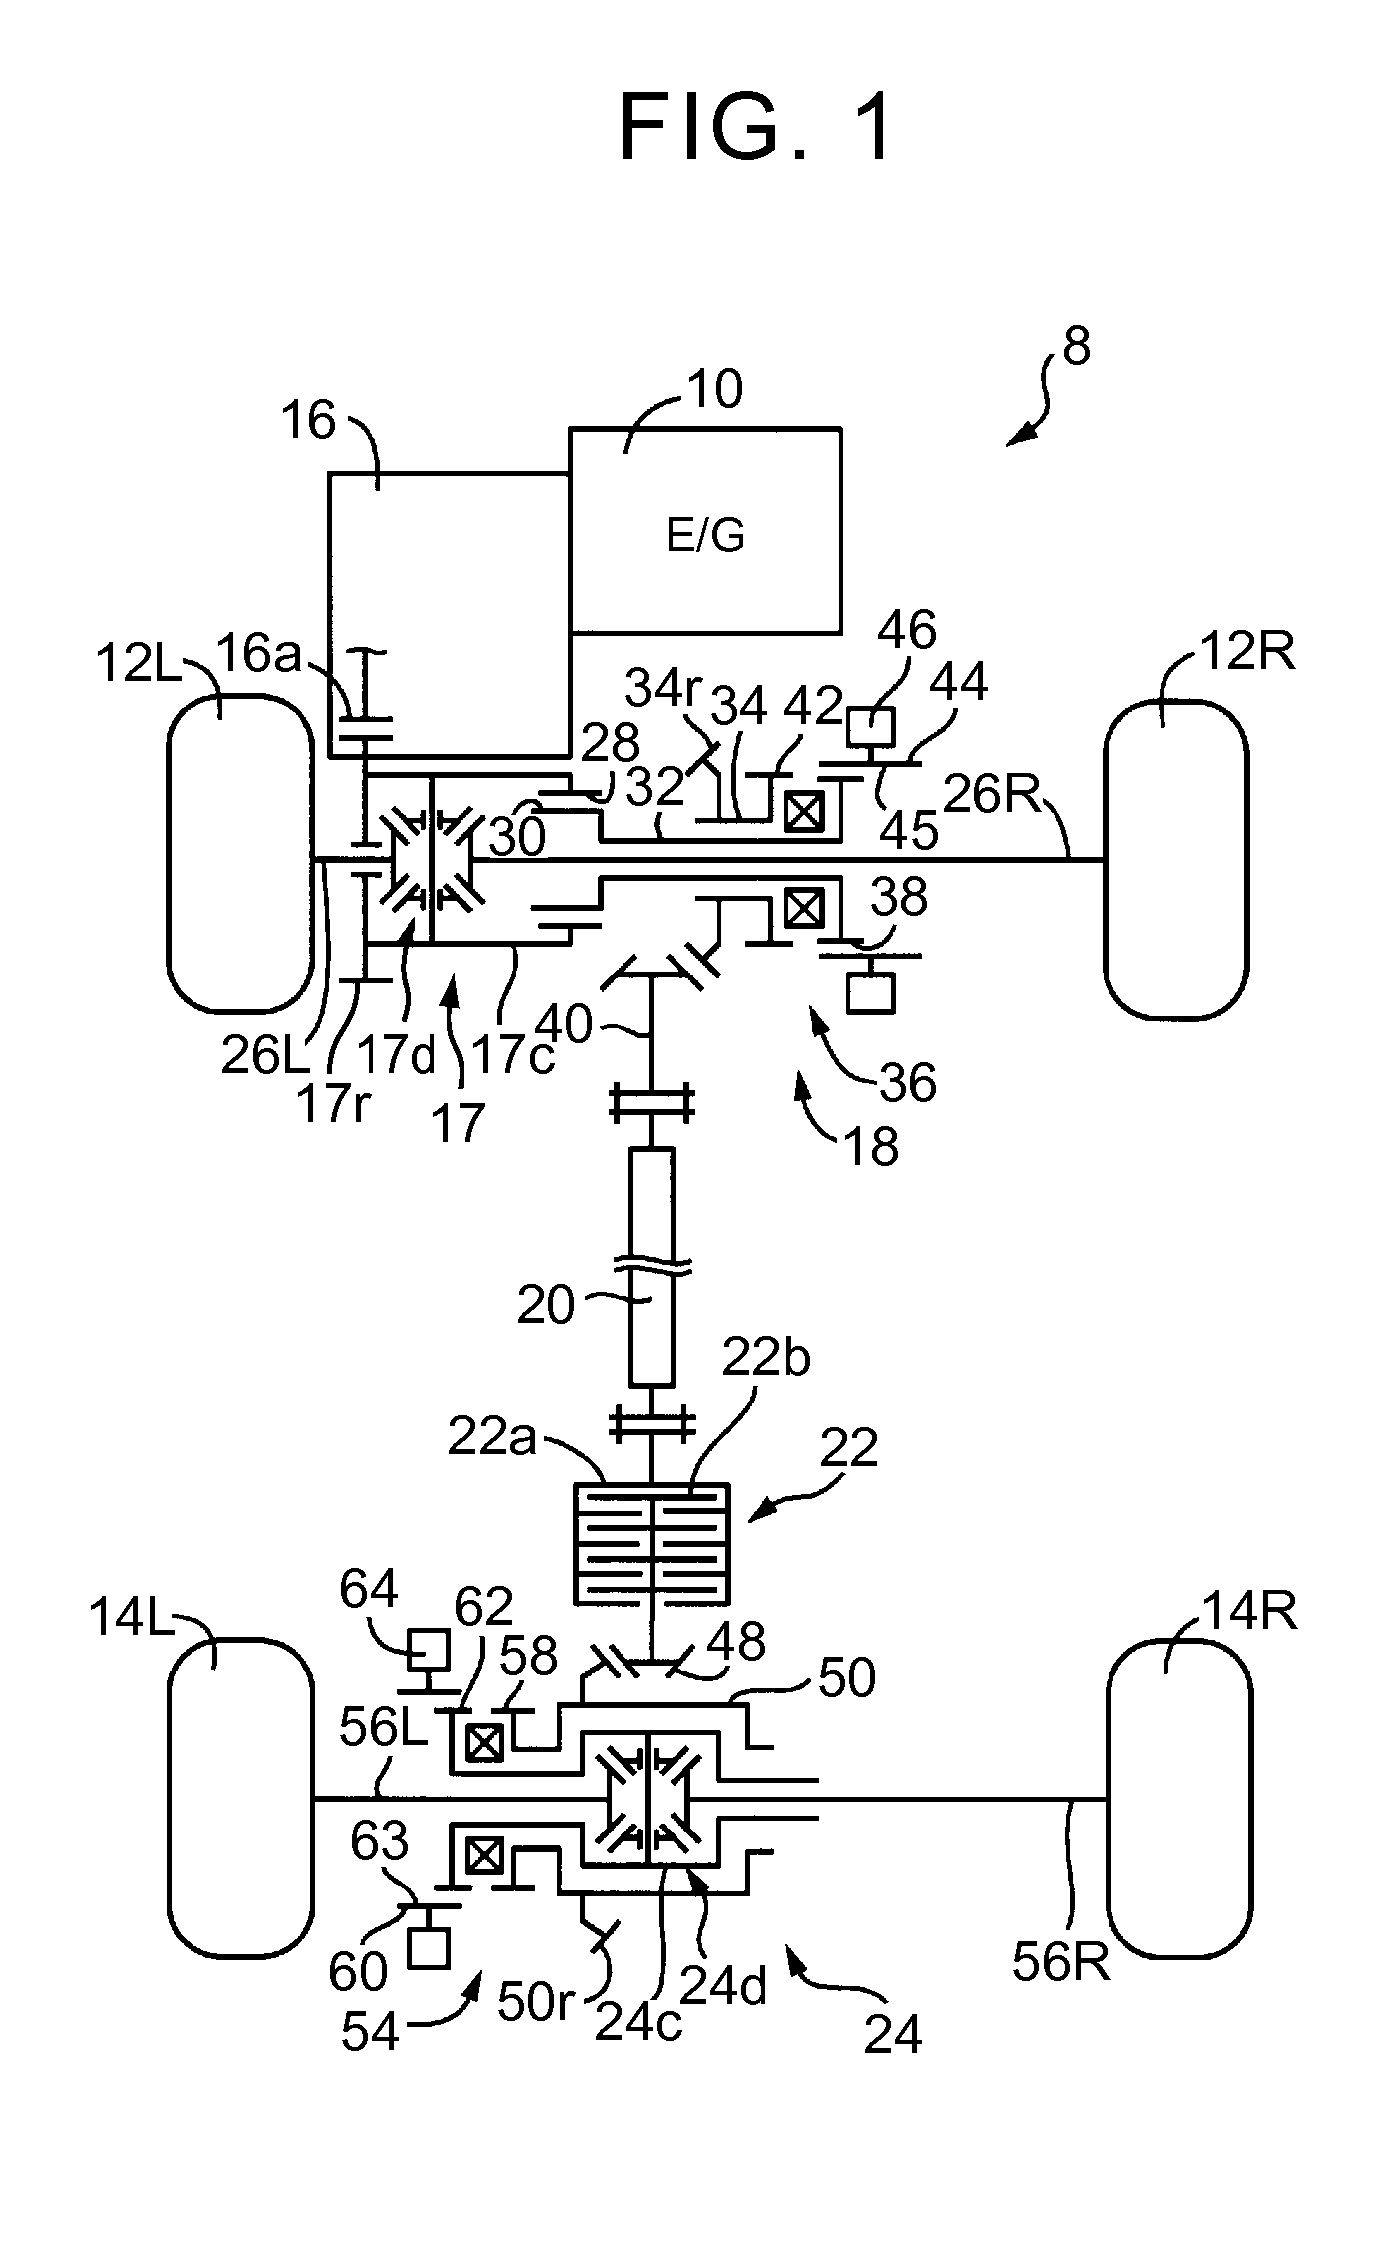 Control system for four-wheel drive vehicle